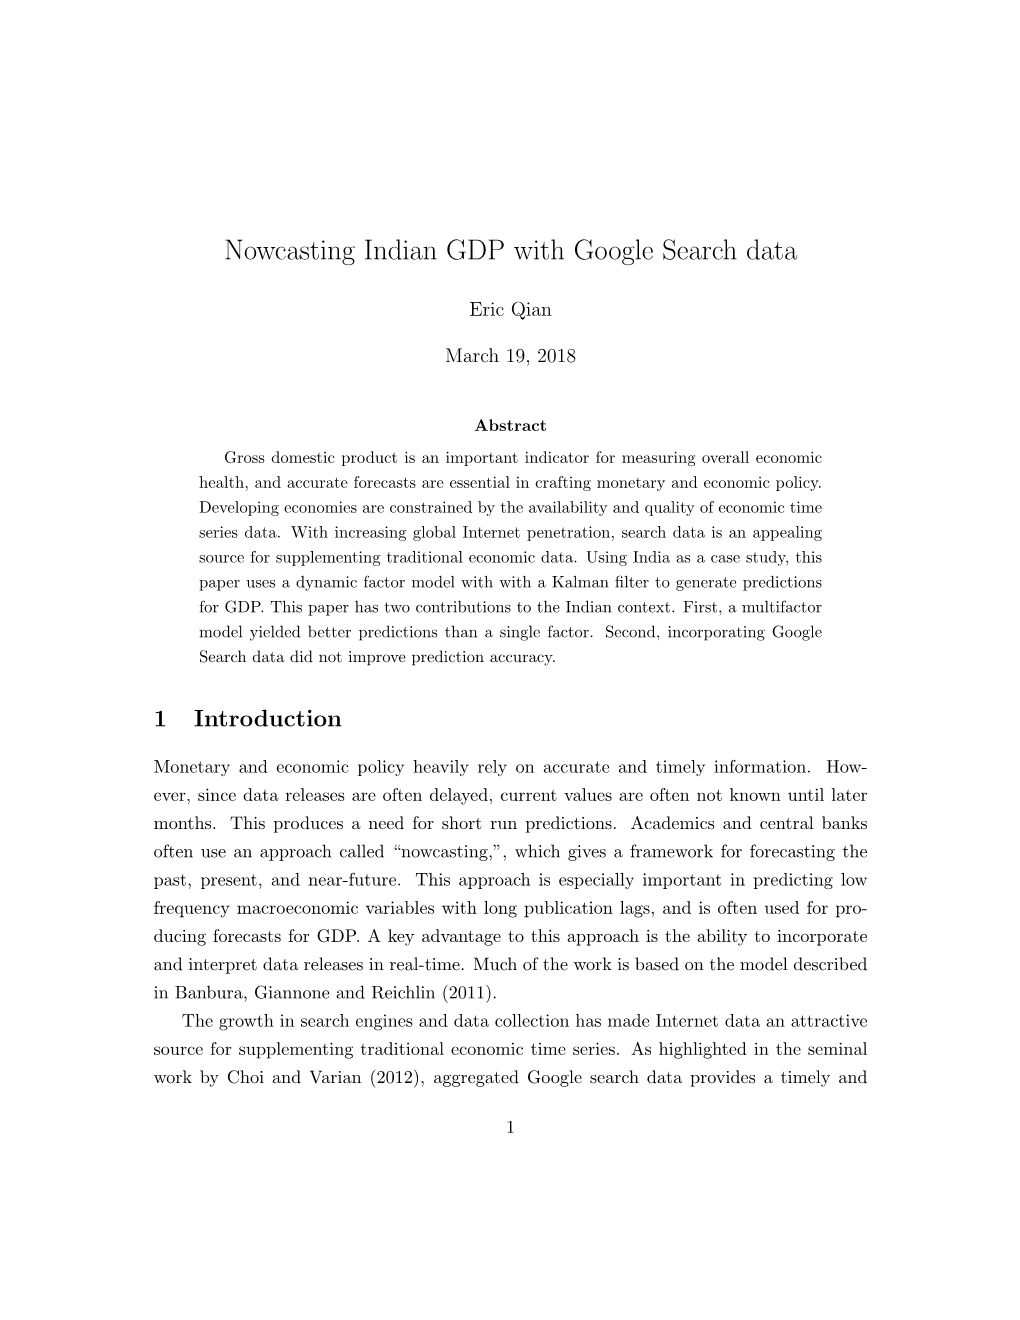 Nowcasting Indian GDP with Google Search Data